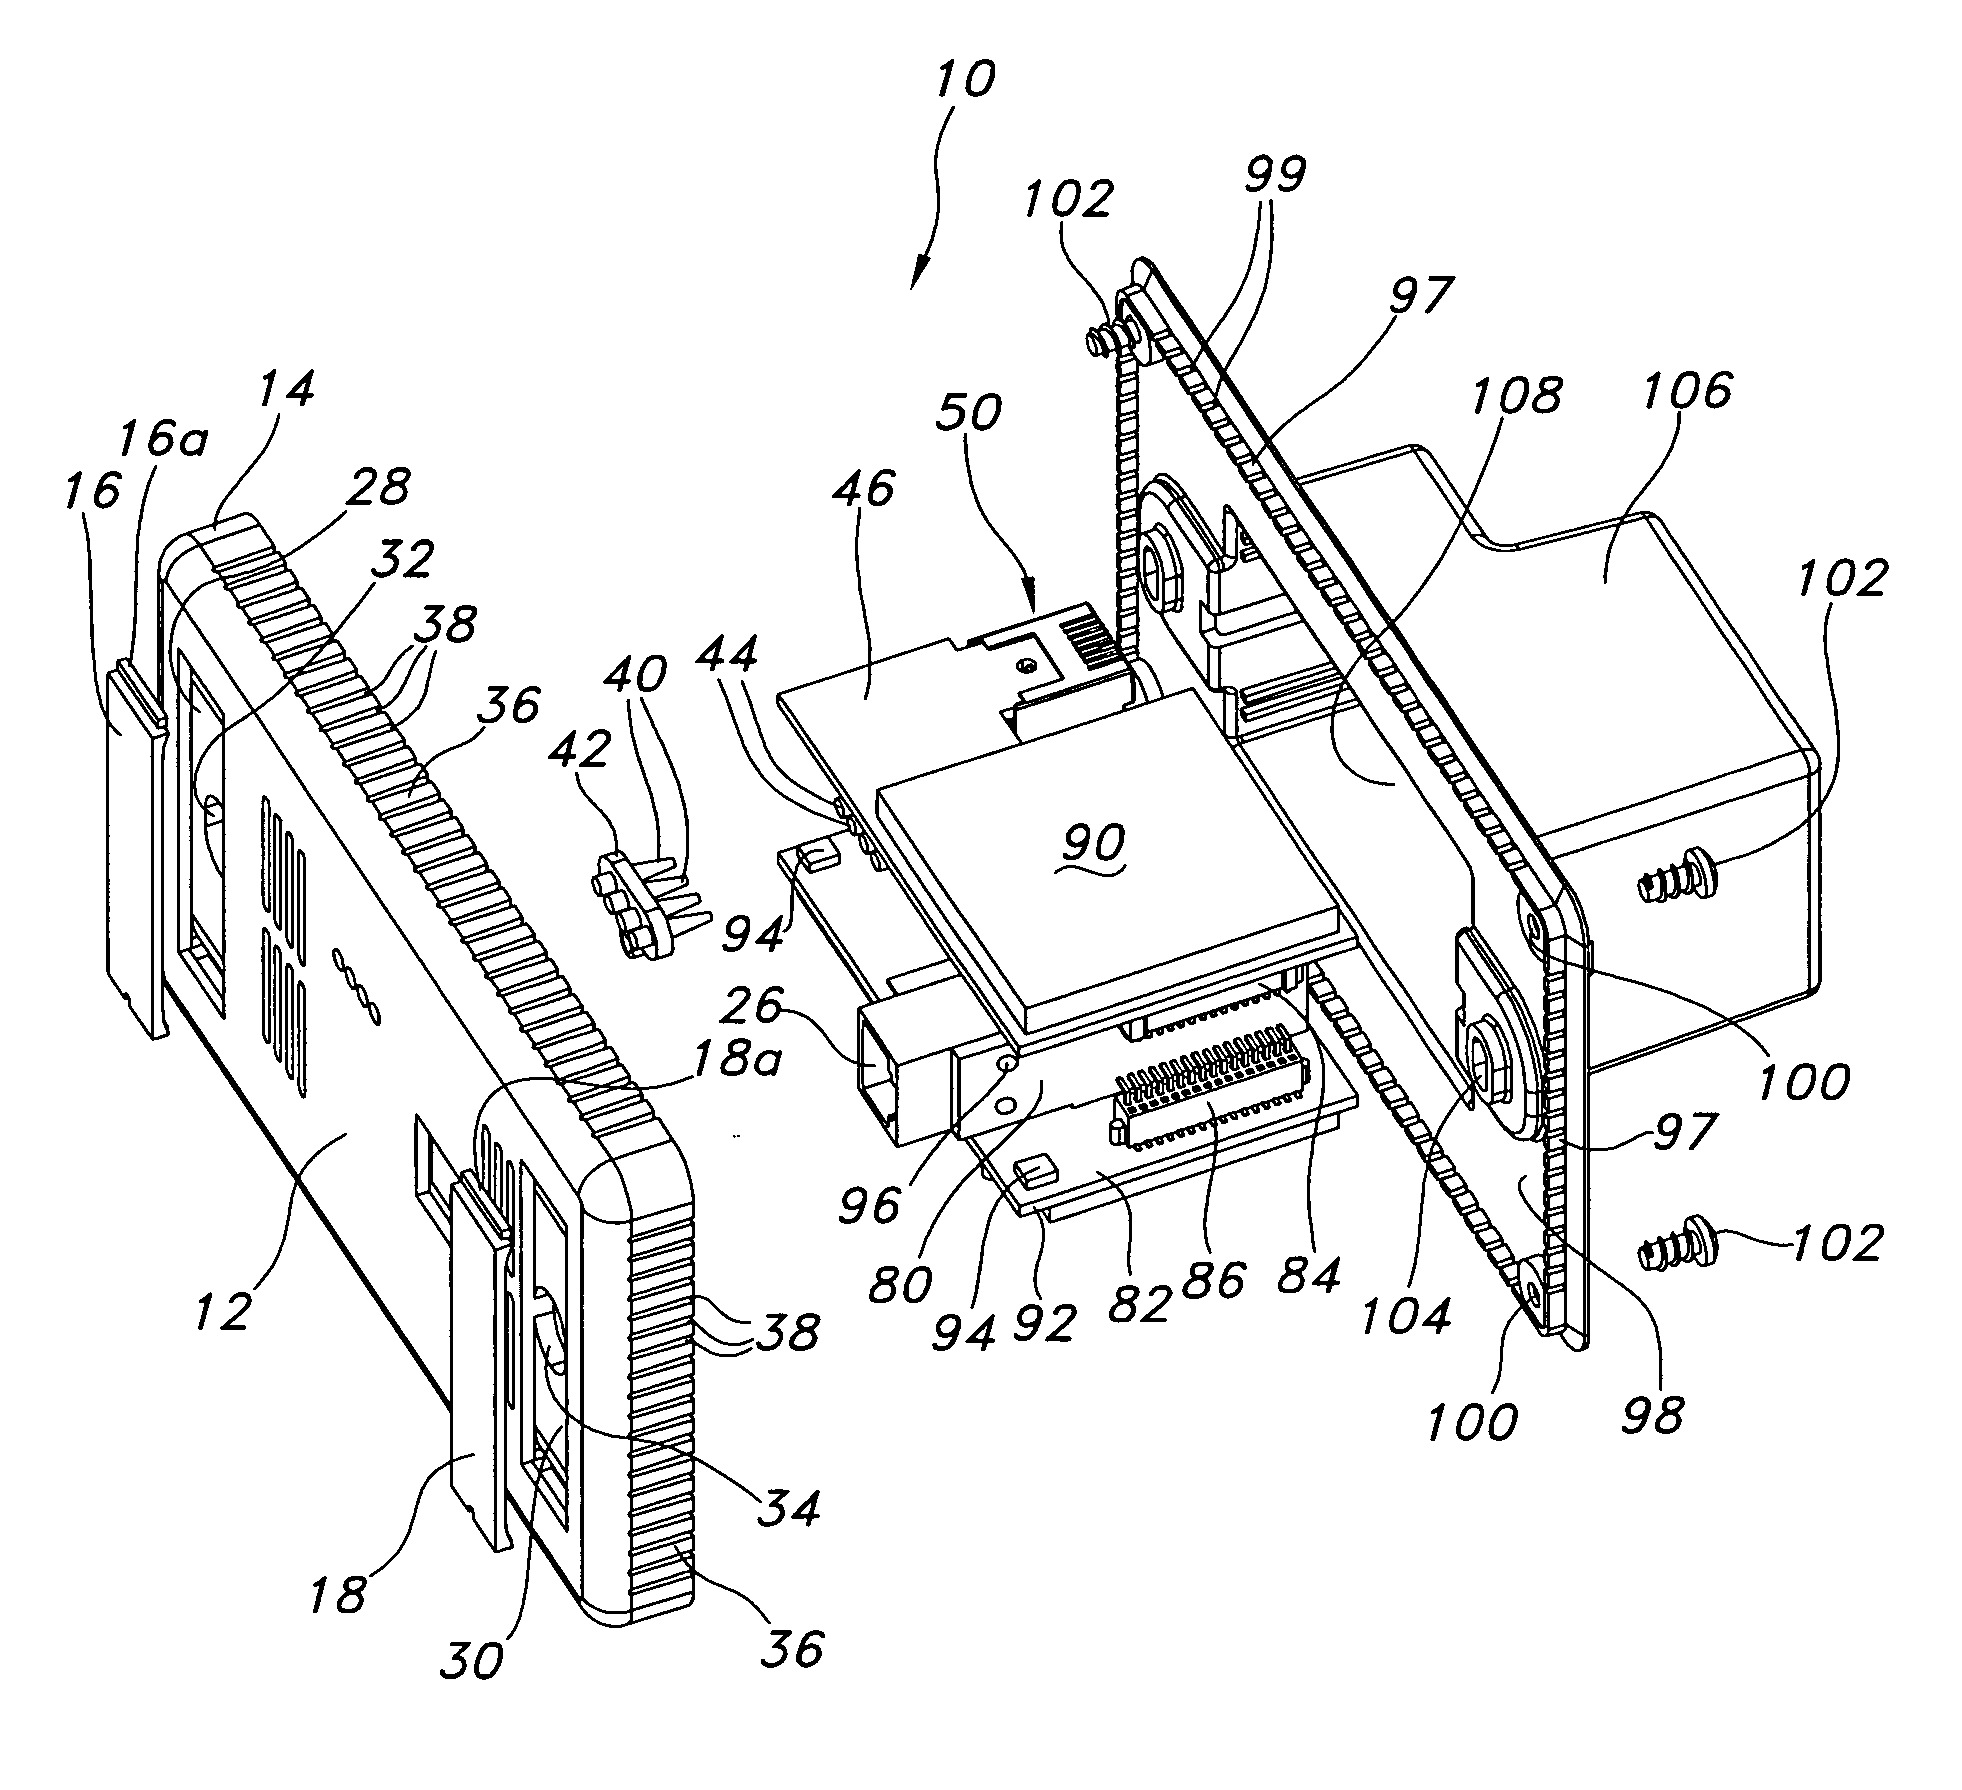 Plug assembly including integral printed circuit board